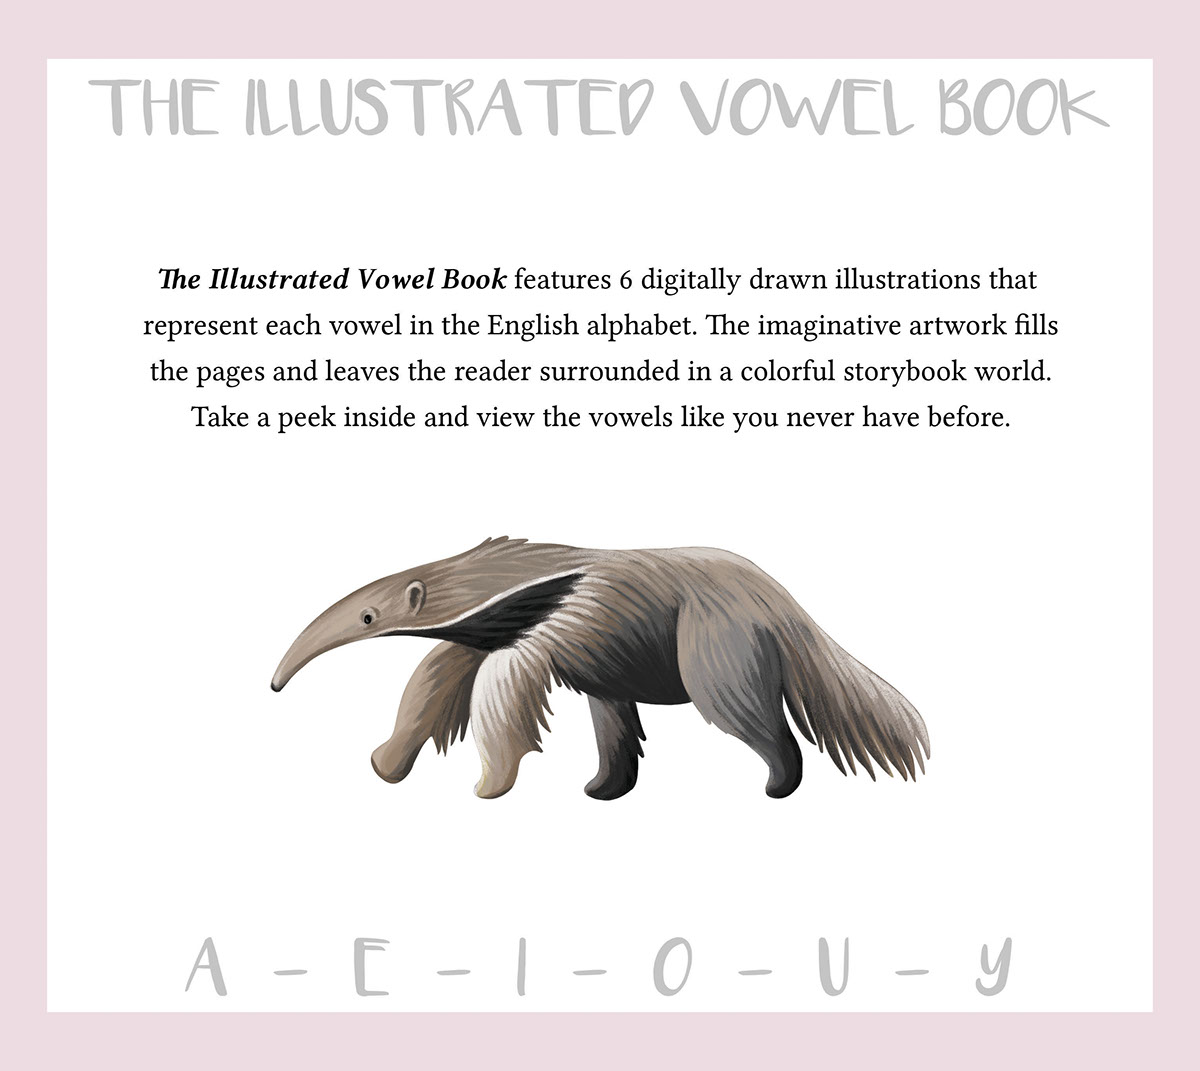 book vowels children's book illustration children's book digital painting anteater iguana elephant outdoors mouse Finch